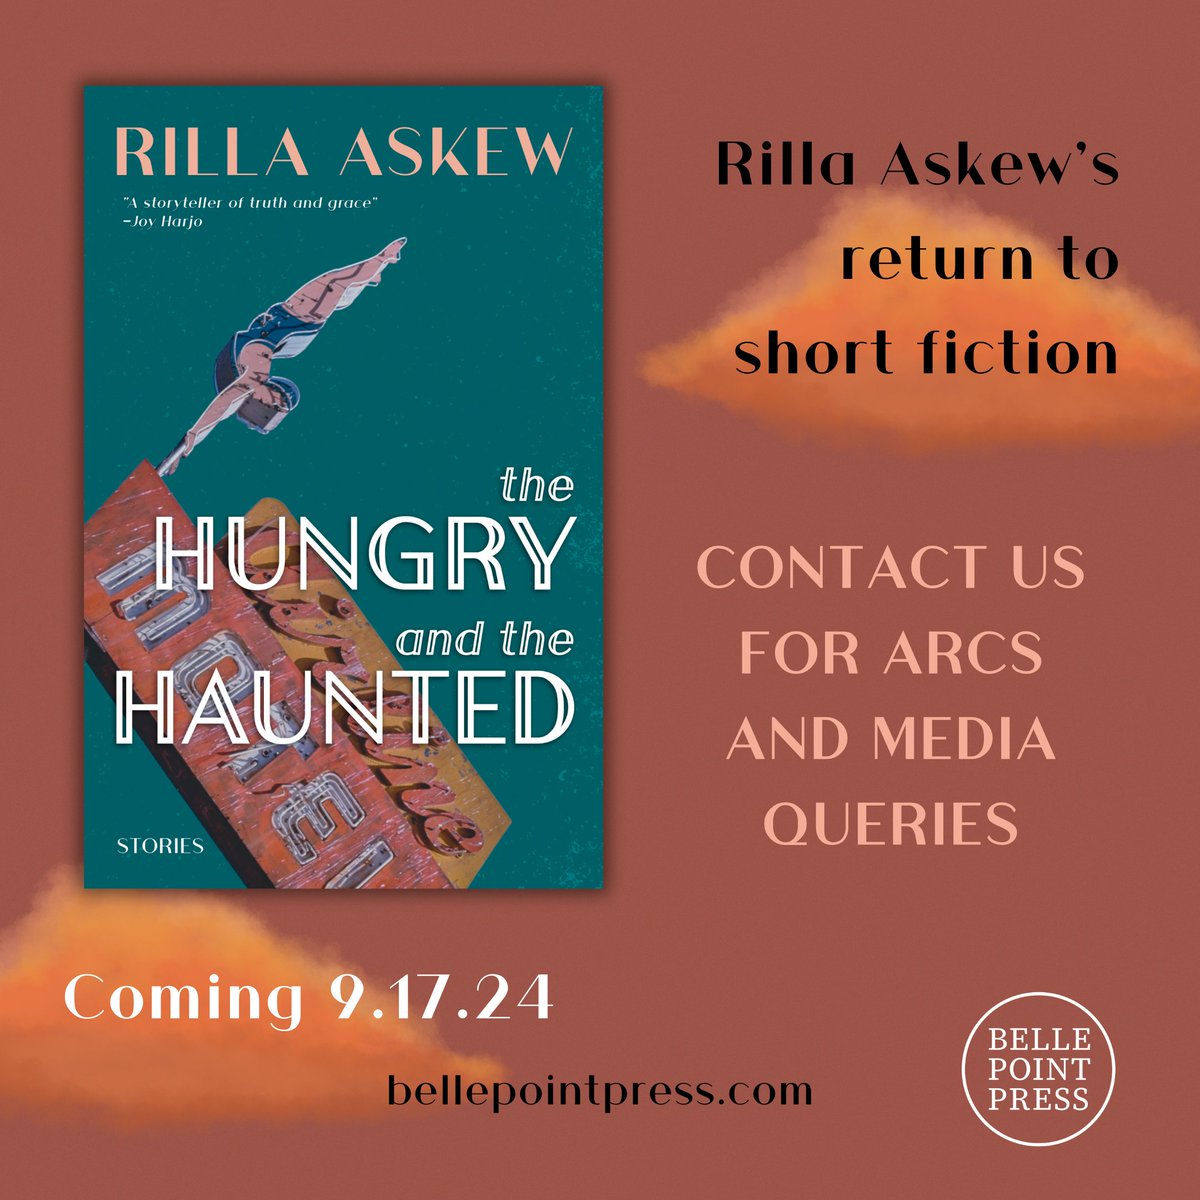 We're gearing up for the fall season with books like this remarkable collection of stories by Rilla Askew. Reach out for media queries or to get on the review list for THE HUNGRY AND THE HAUNTED: bellepointpress.com/products/the-h…